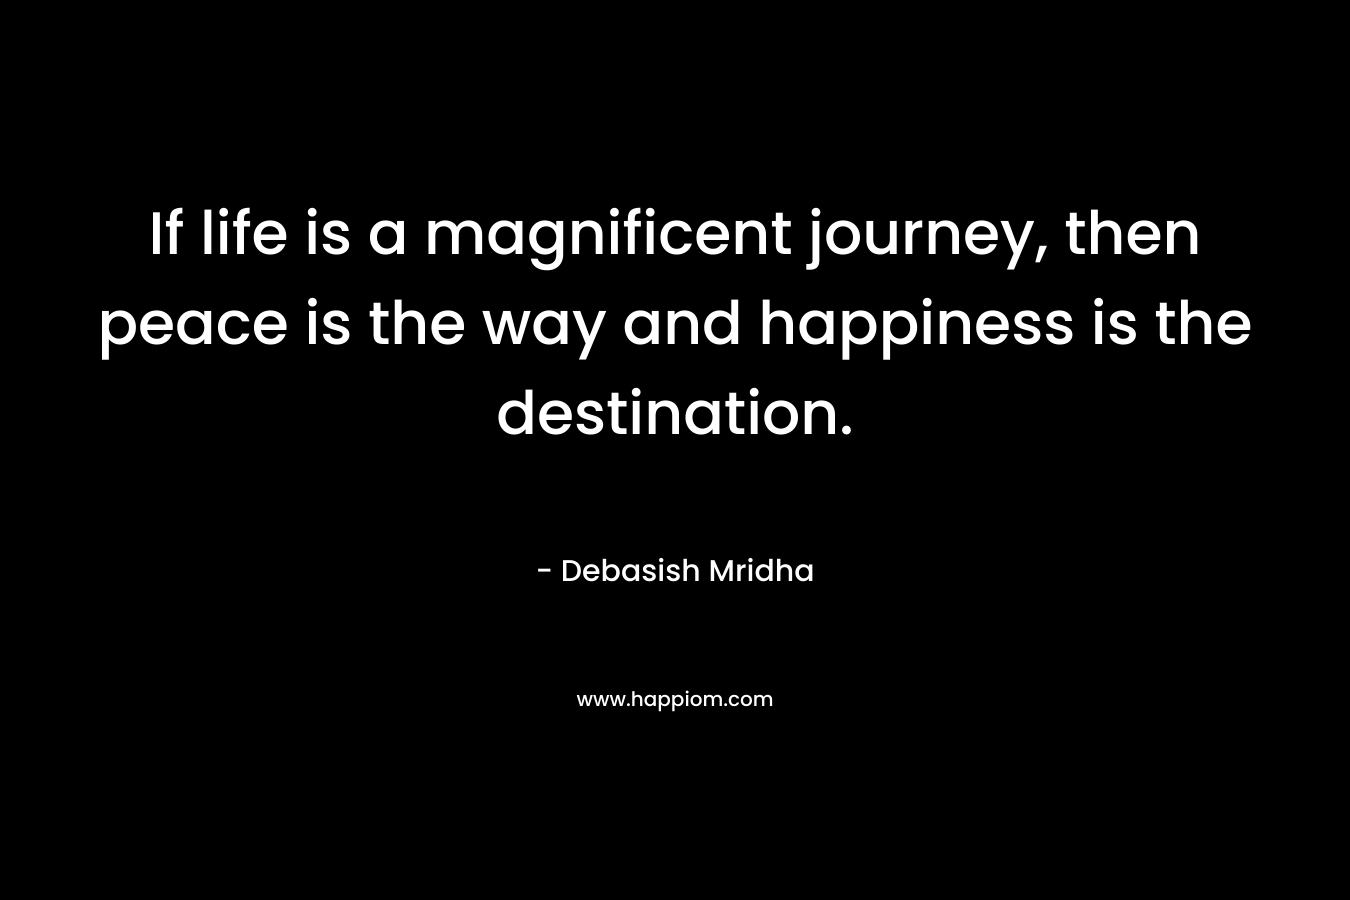 If life is a magnificent journey, then peace is the way and happiness is the destination.